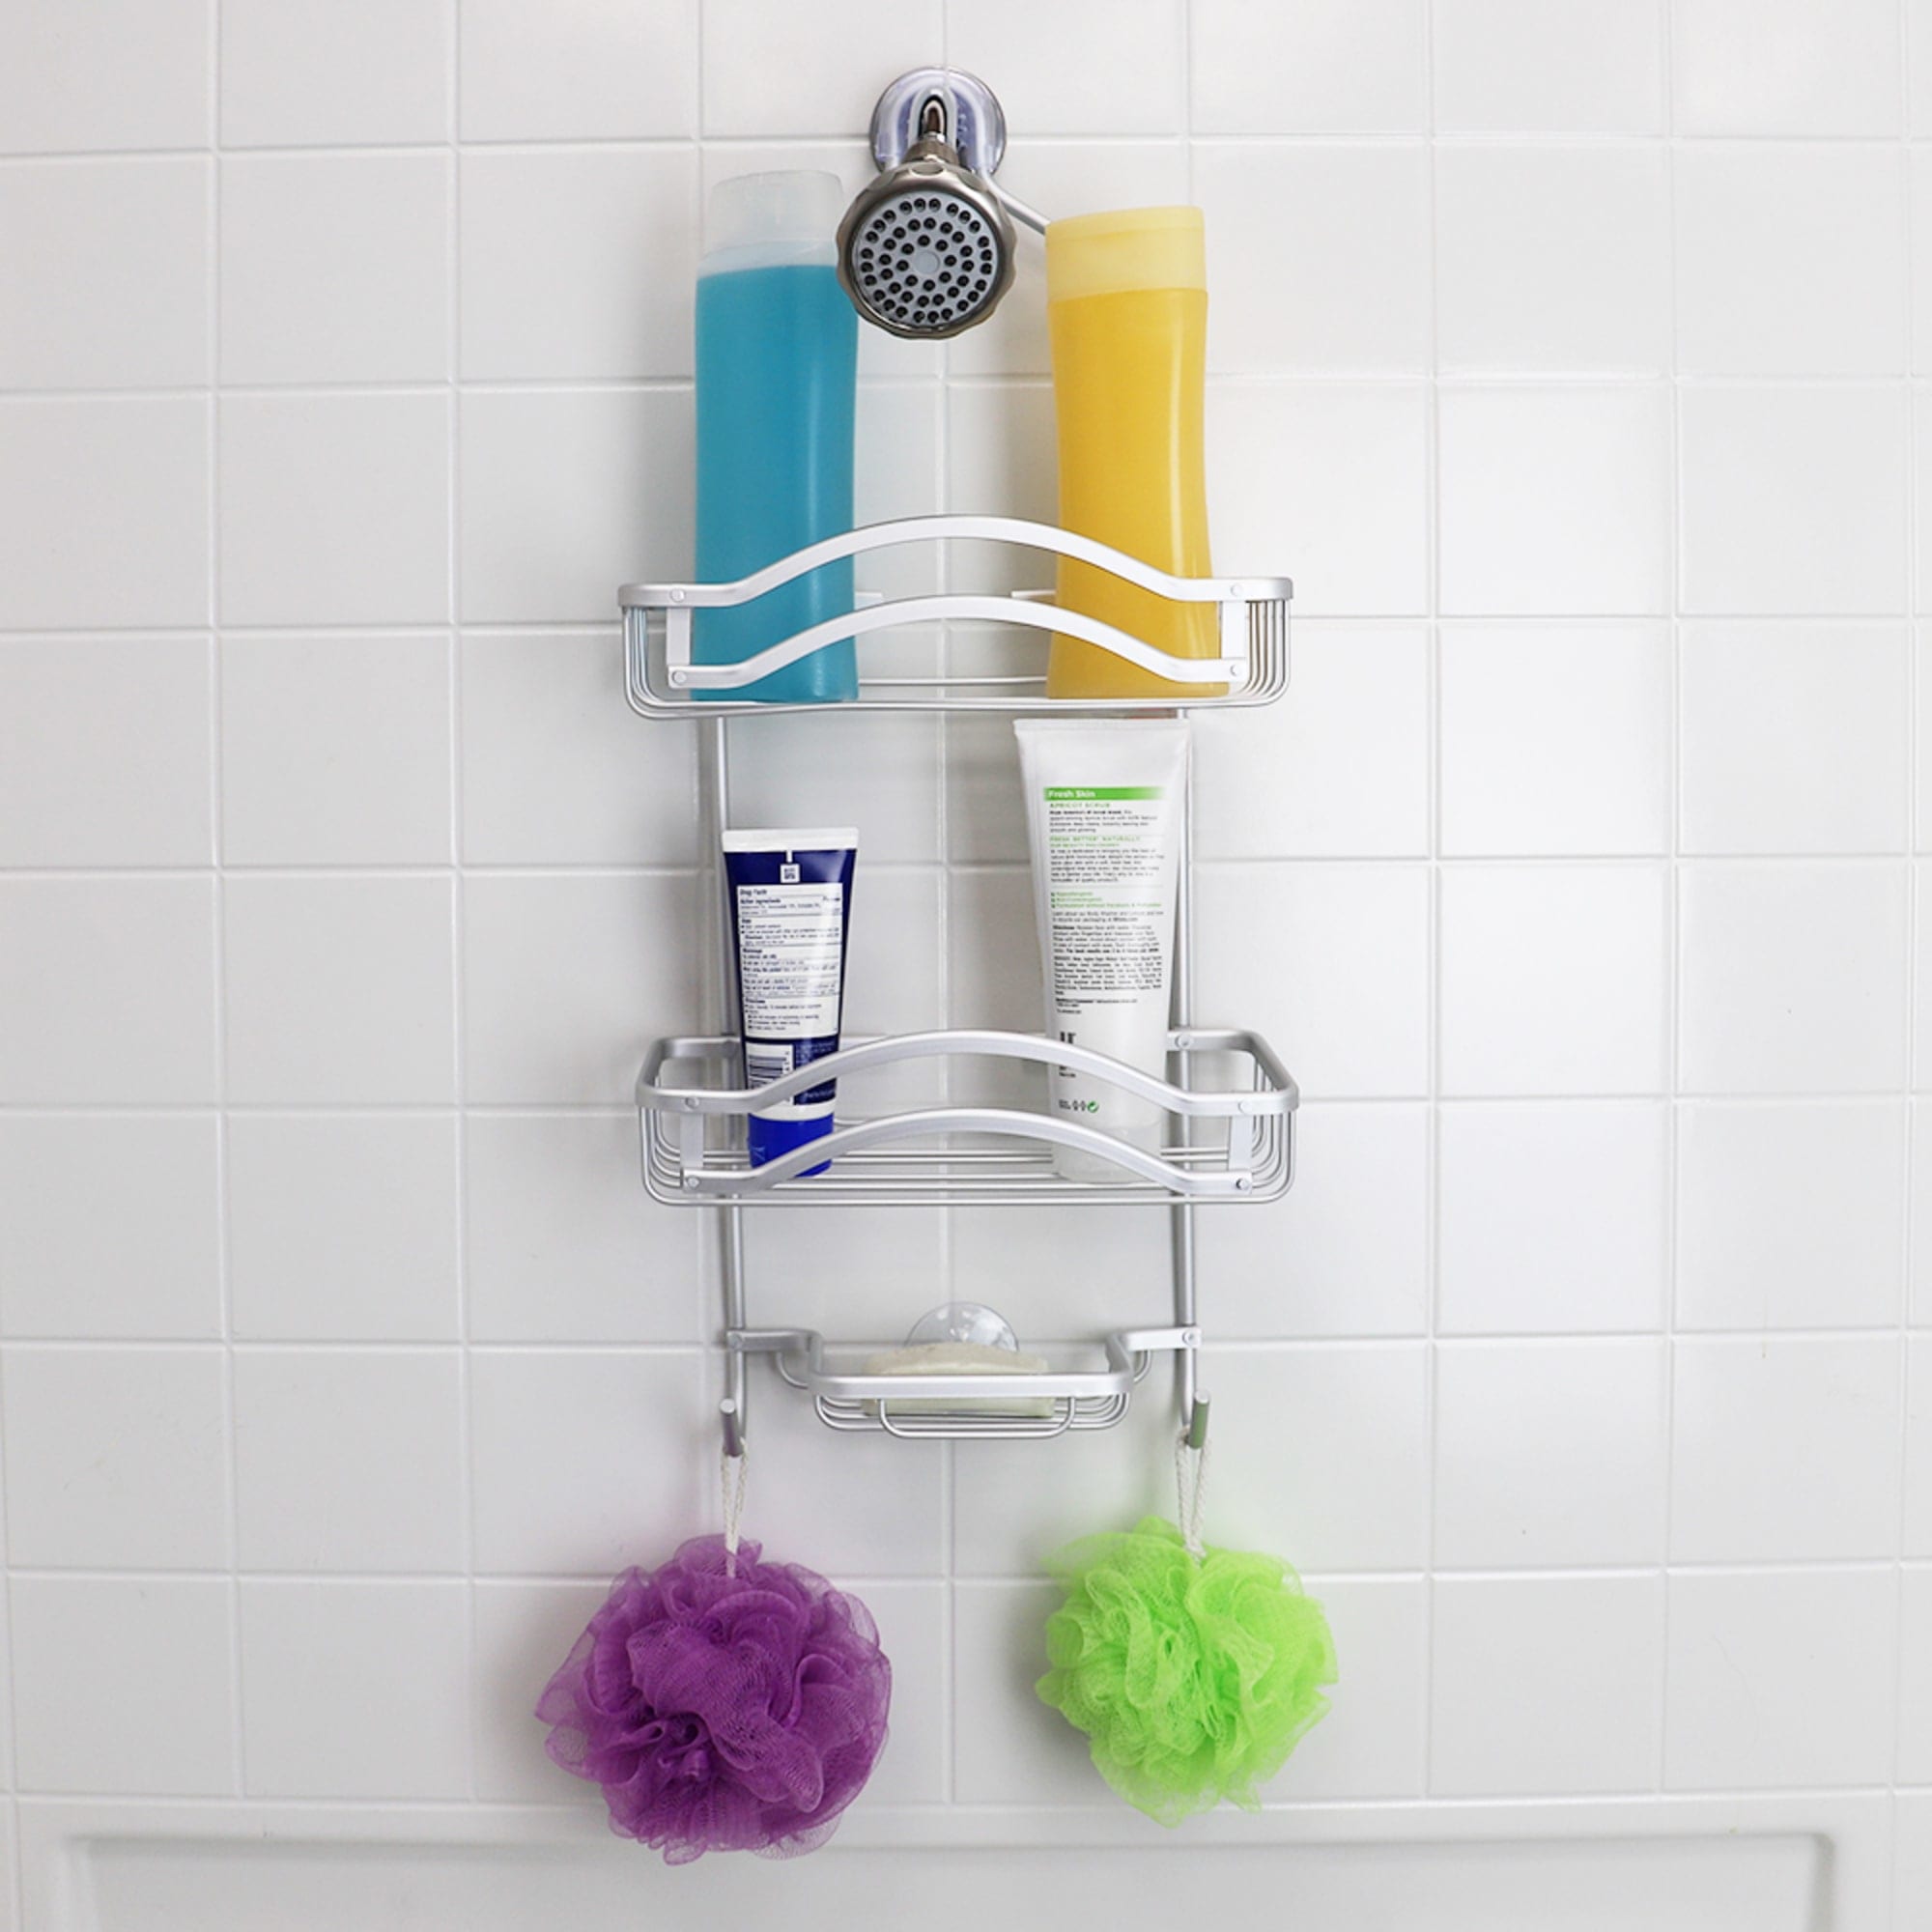 Home Basics Double Wave 2 Tier Aluminum Suction Shower Caddy with Integrated Hooks and Soap Tray, Grey $15.00 EACH, CASE PACK OF 6